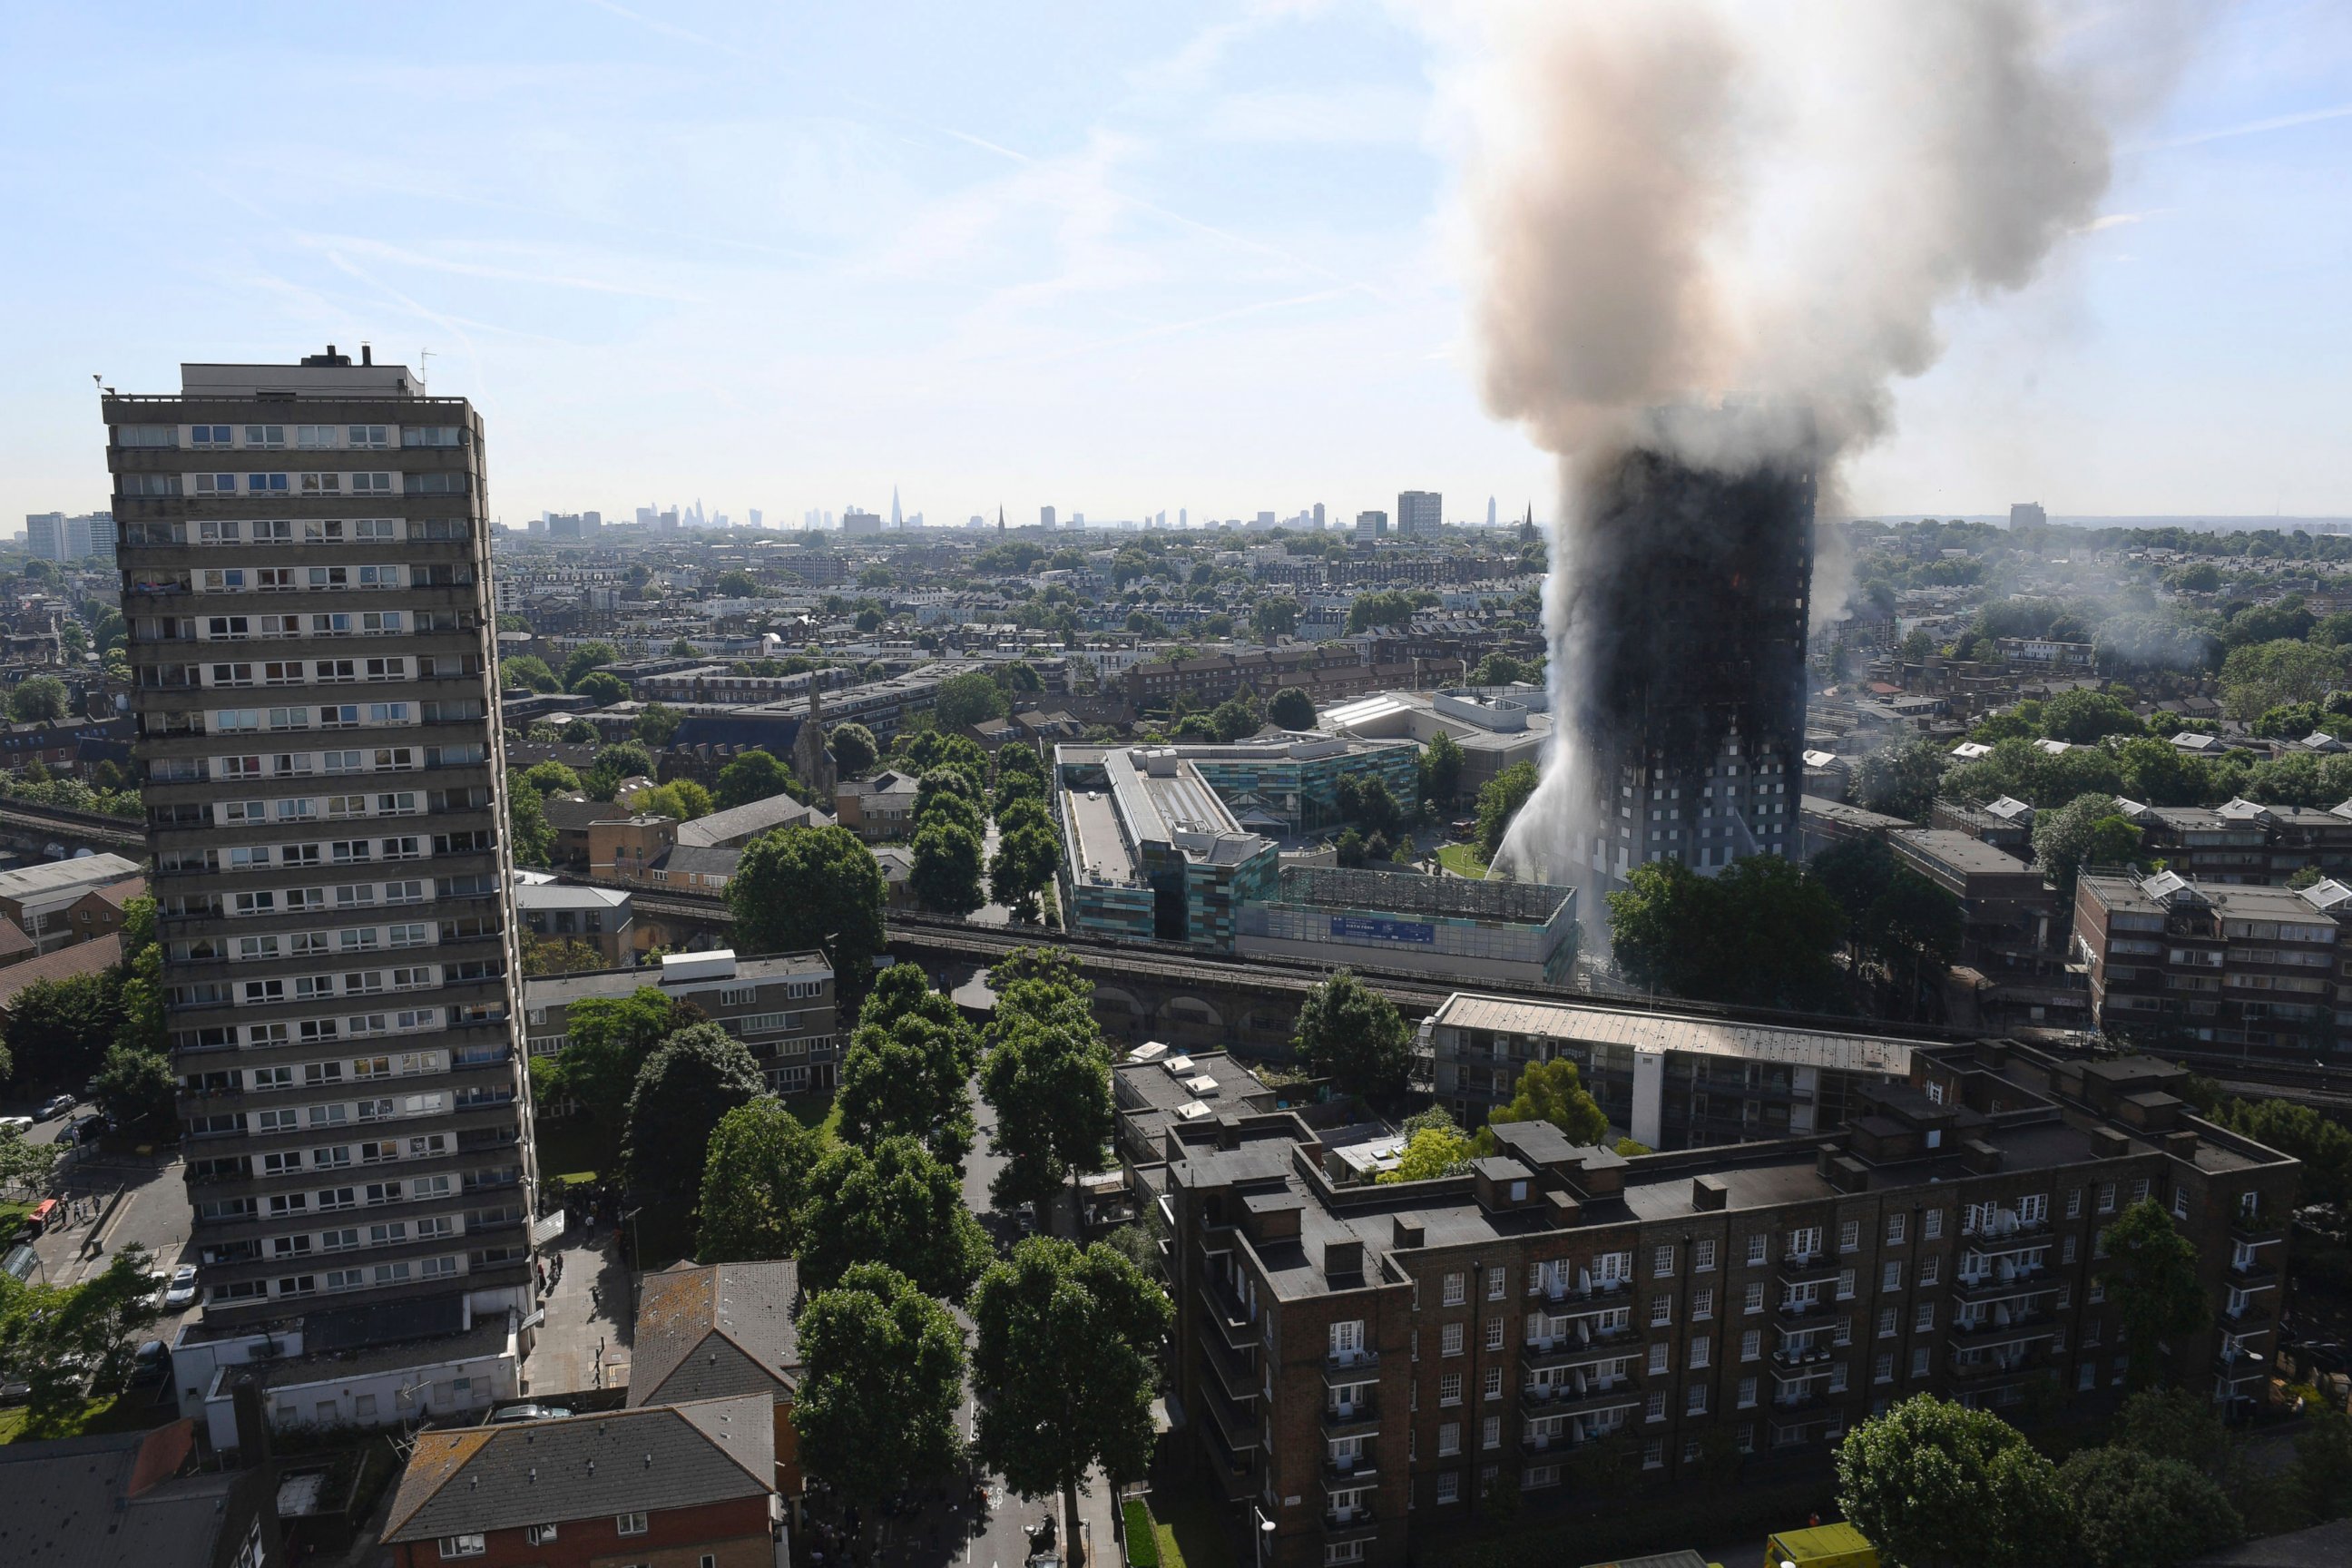 PHOTO: Smoke billows from a fire that has engulfed the 24-story Grenfell Tower in west London, June 14, 2017.